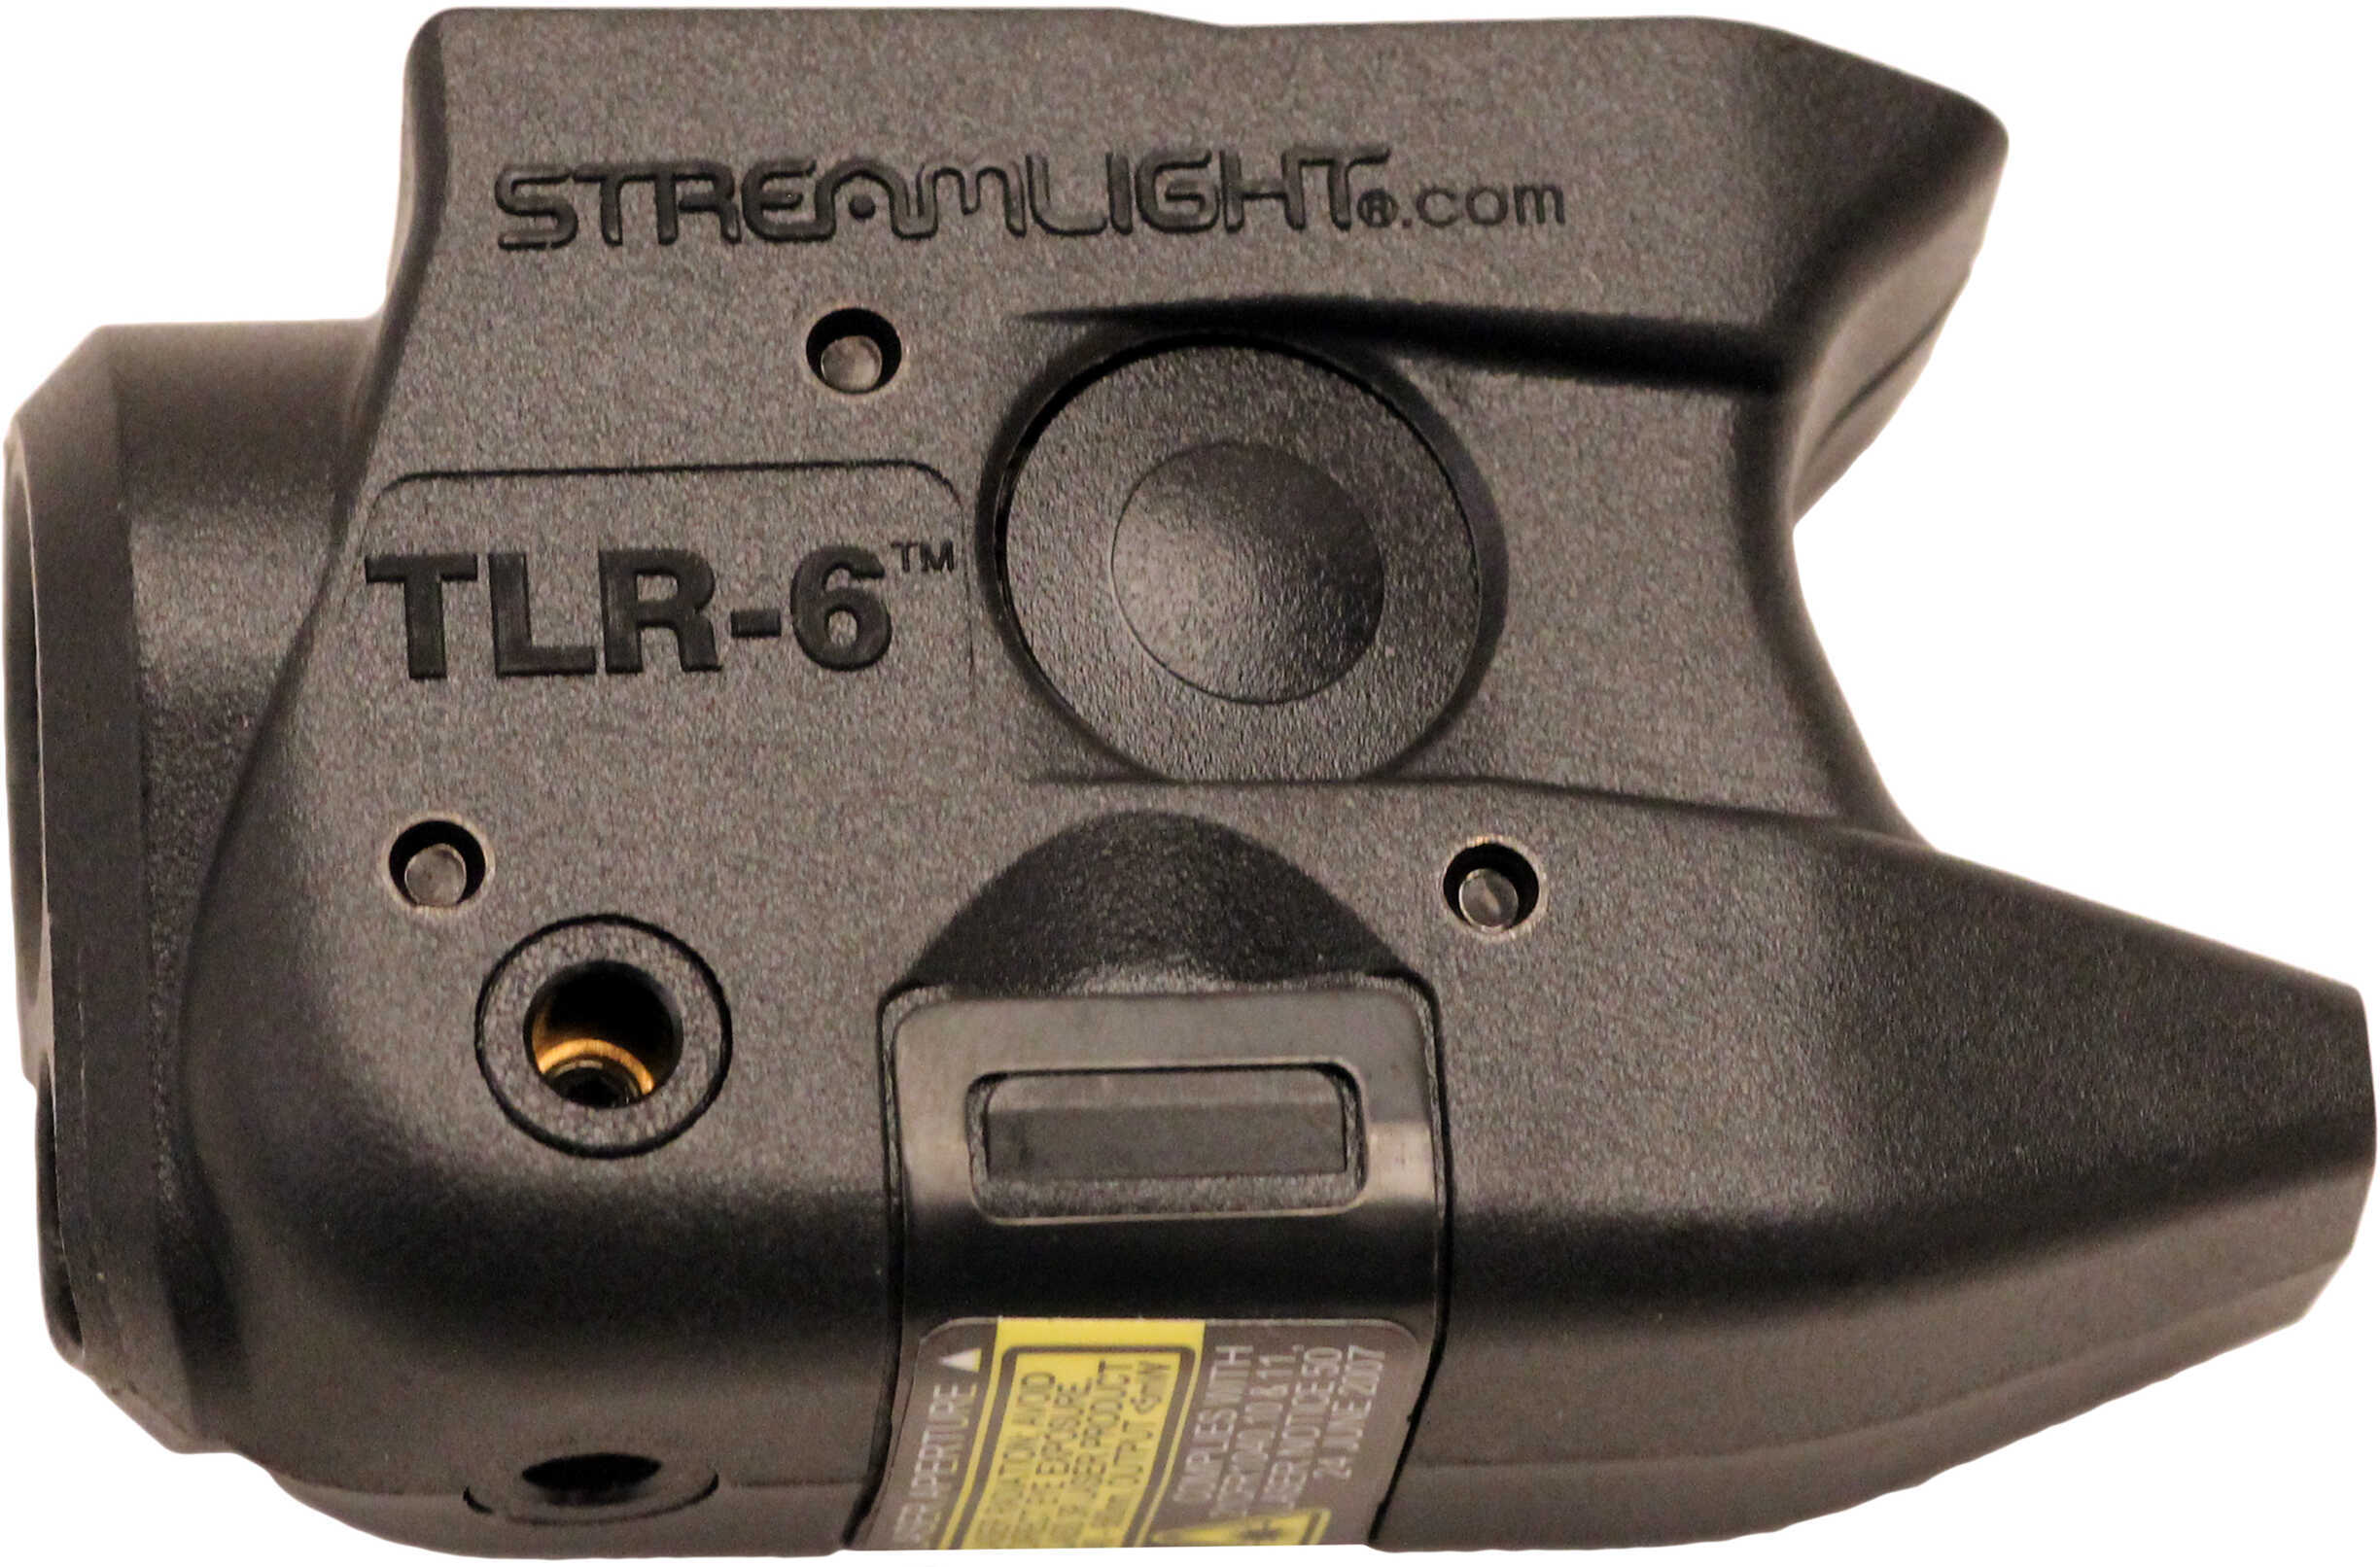 Streamlight TLR-6 Tactical Light For Kahr Md: 69274-img-1